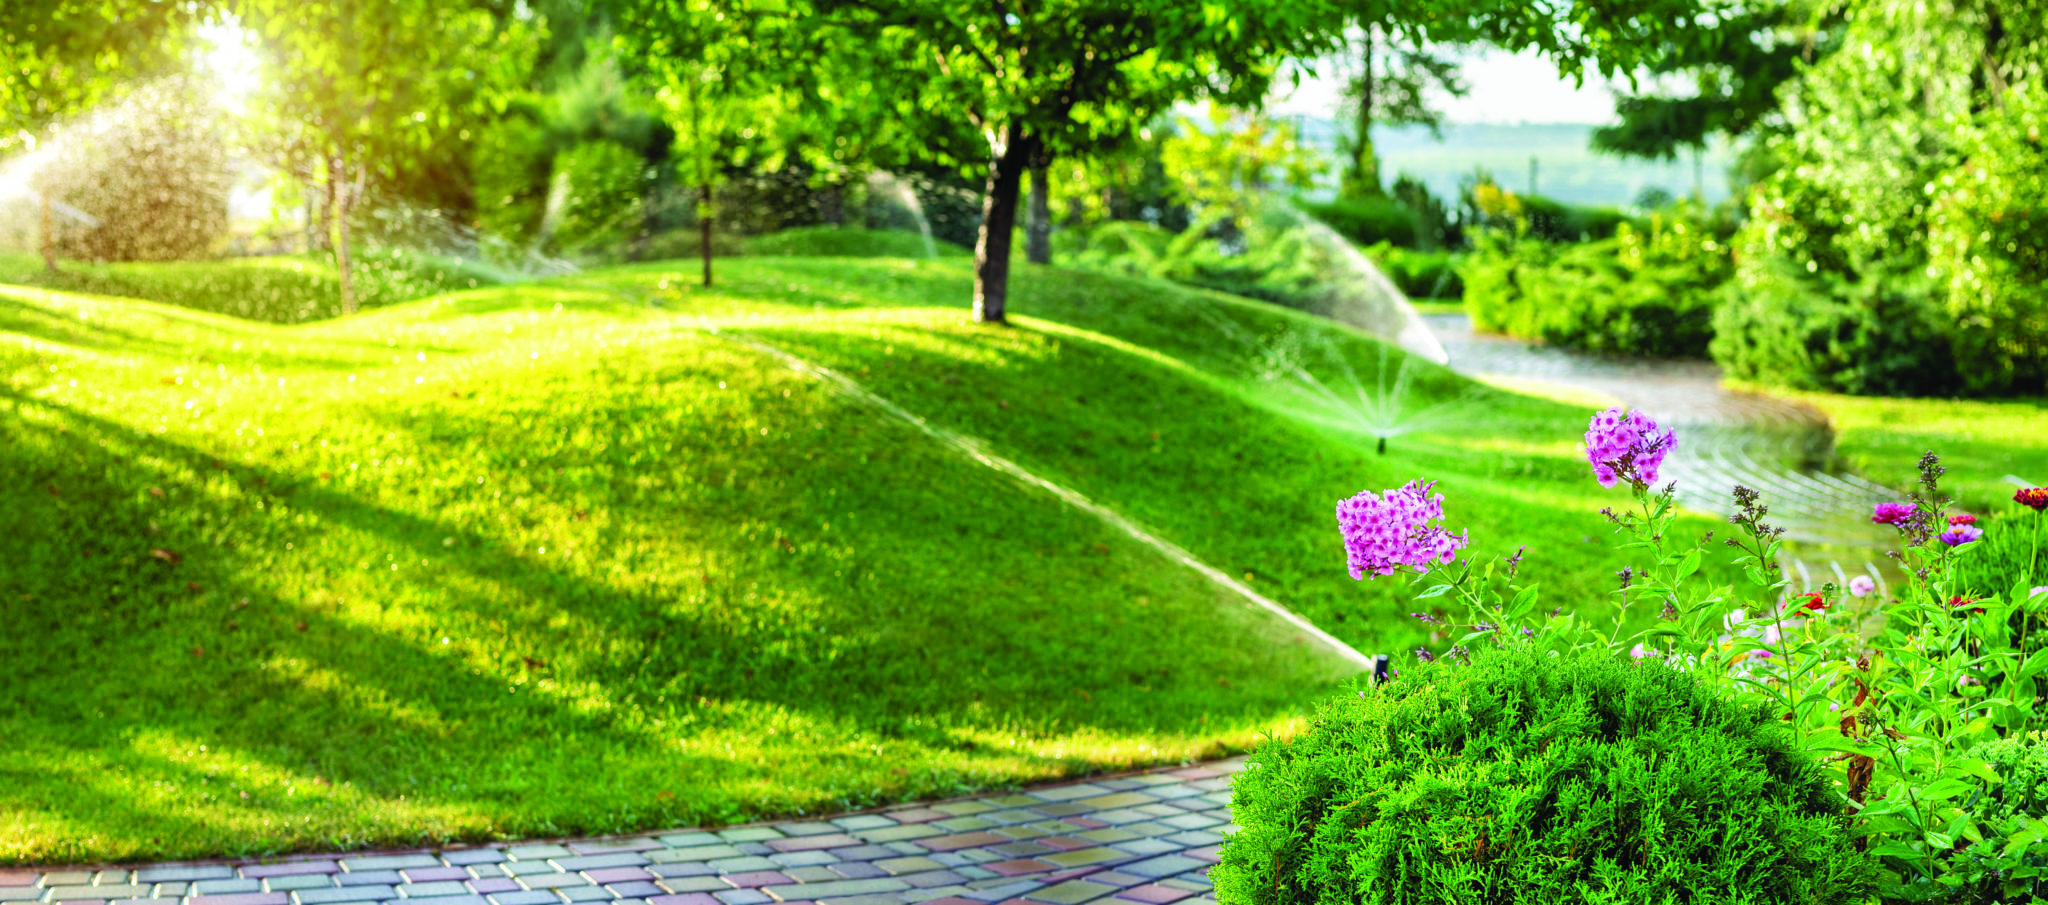 Automatic garden watering system with different sprinklers installed under turf. Landscape design with lawn hills and fruit garden irrigated with smart autonomous sprayers at sunset evening time.